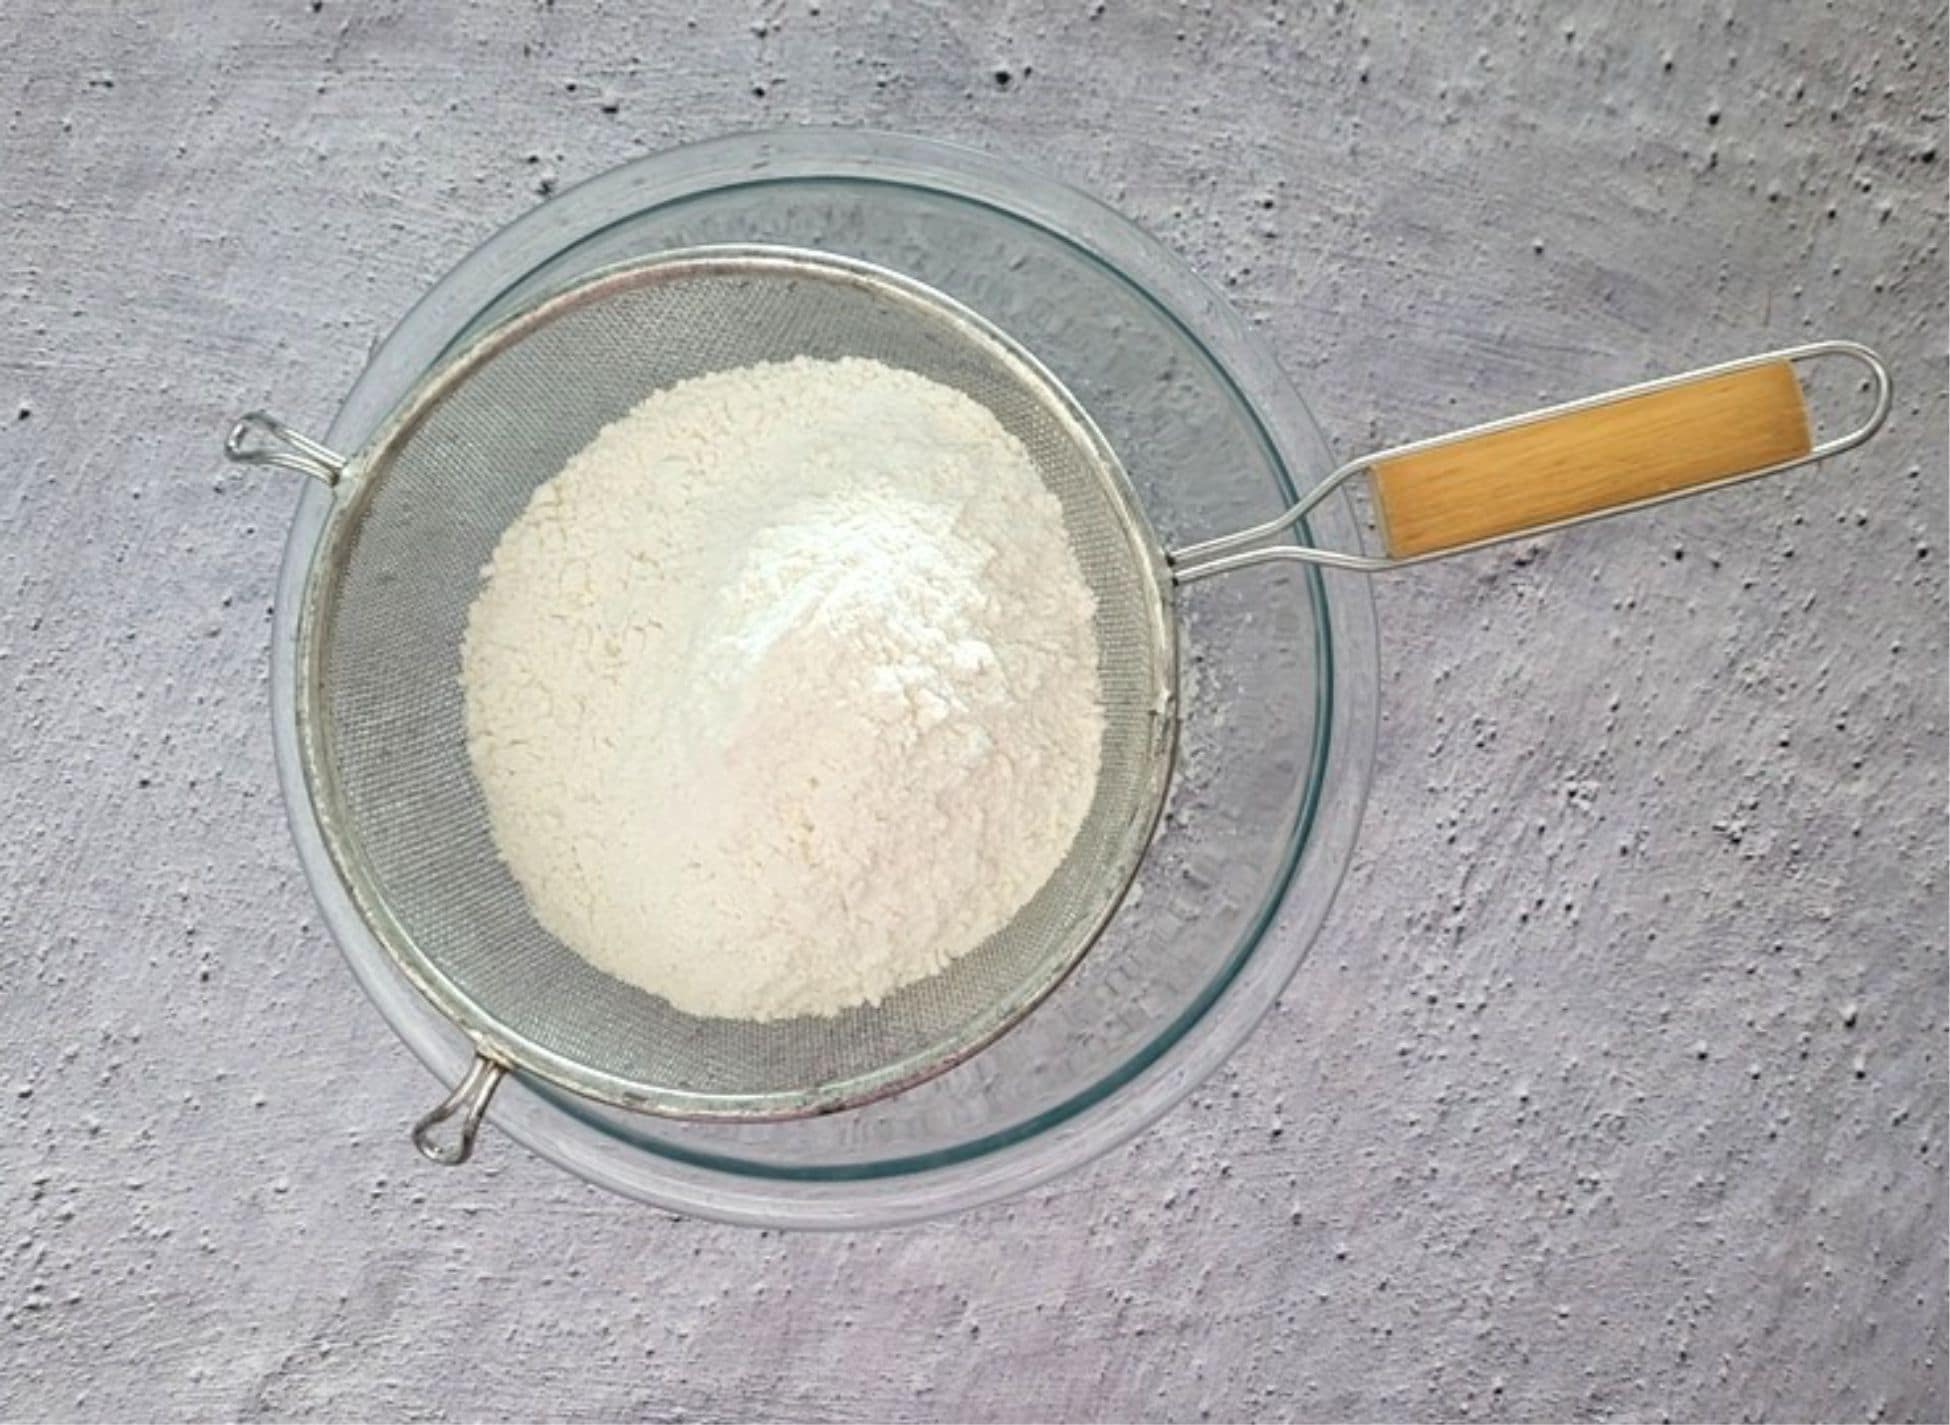 flour, baking soda and salt in a sieve being sifted to remove lumps